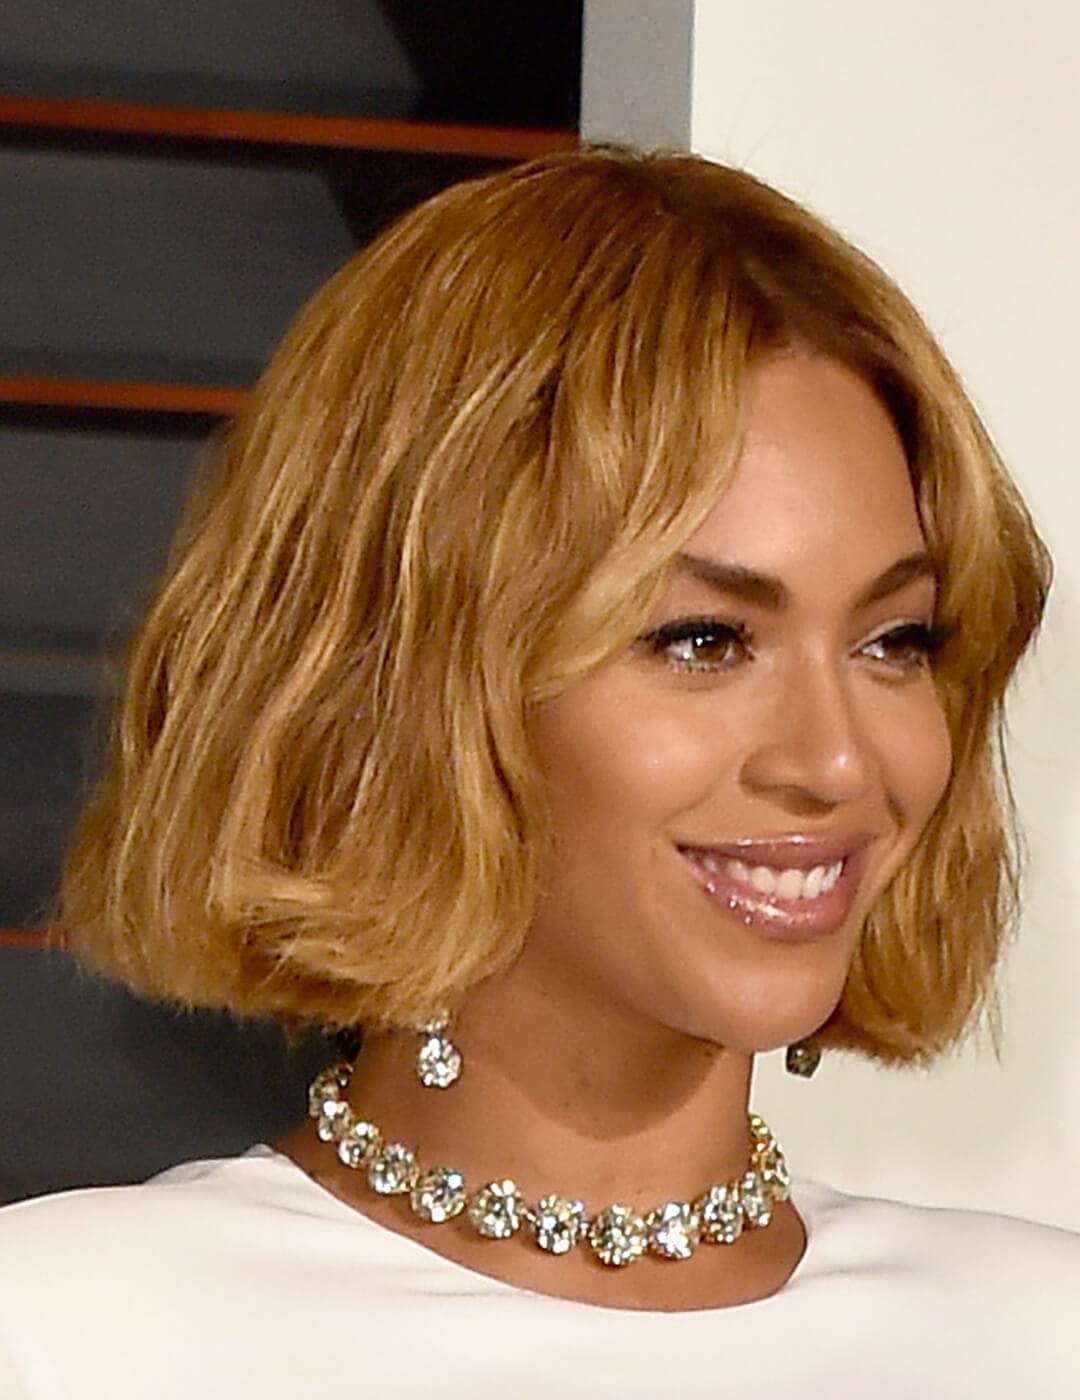 An image of Beyonce beautifully smiling with her glossy, nude lipstick accentuated with a white-gold necklace and earring